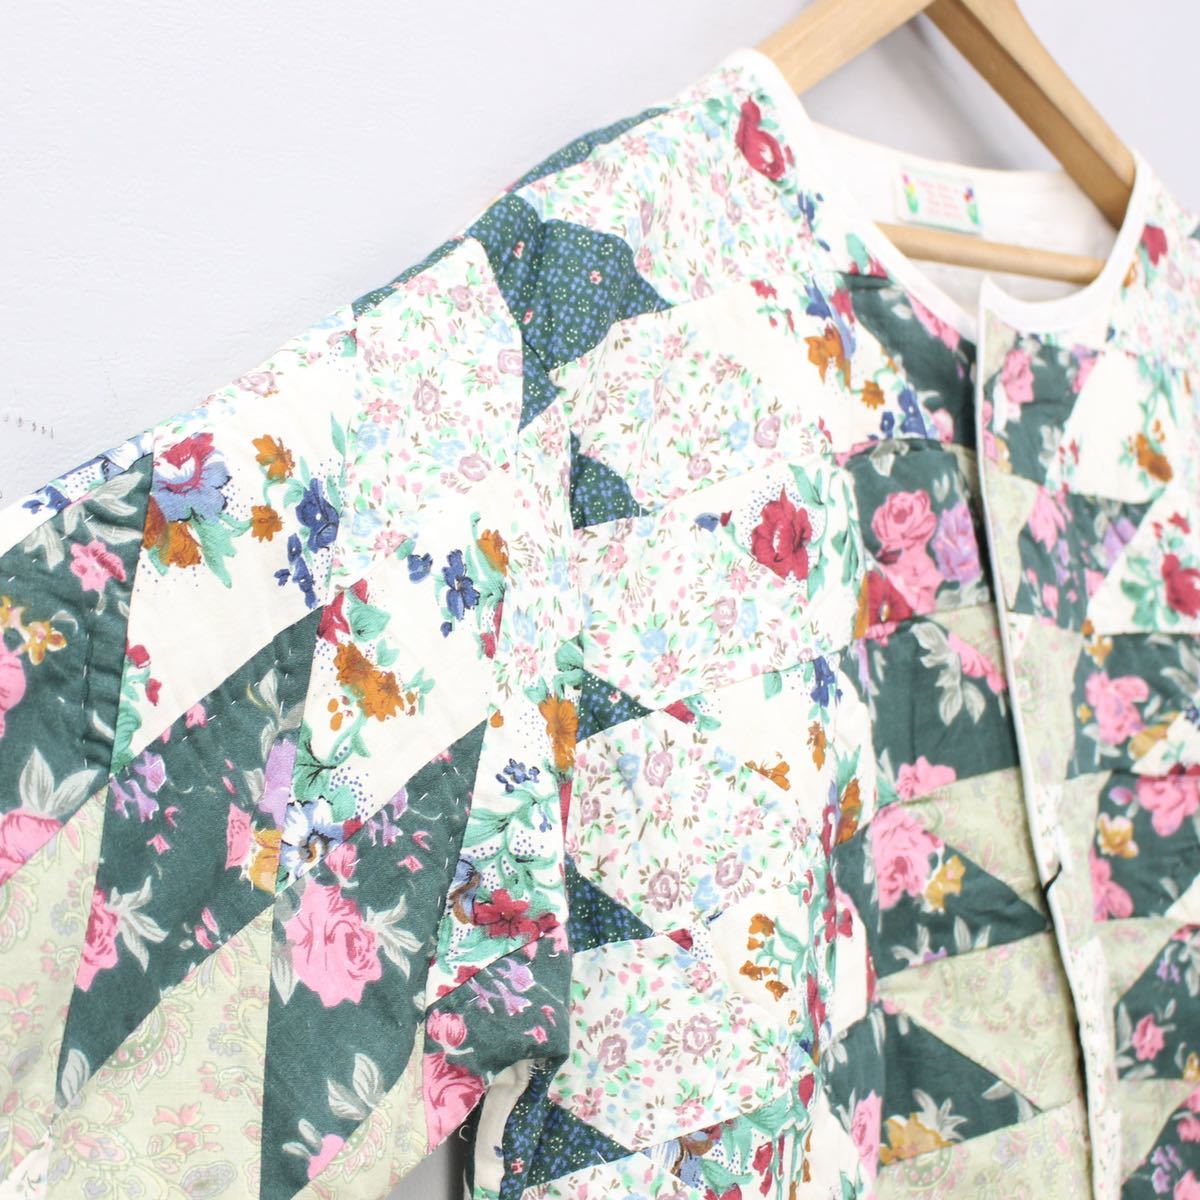 USA VINTAGE FLOWER PATTERNED QUILTING PATCHWORK  JACKET/アメリカ古着キルティングパッチワークジャケット